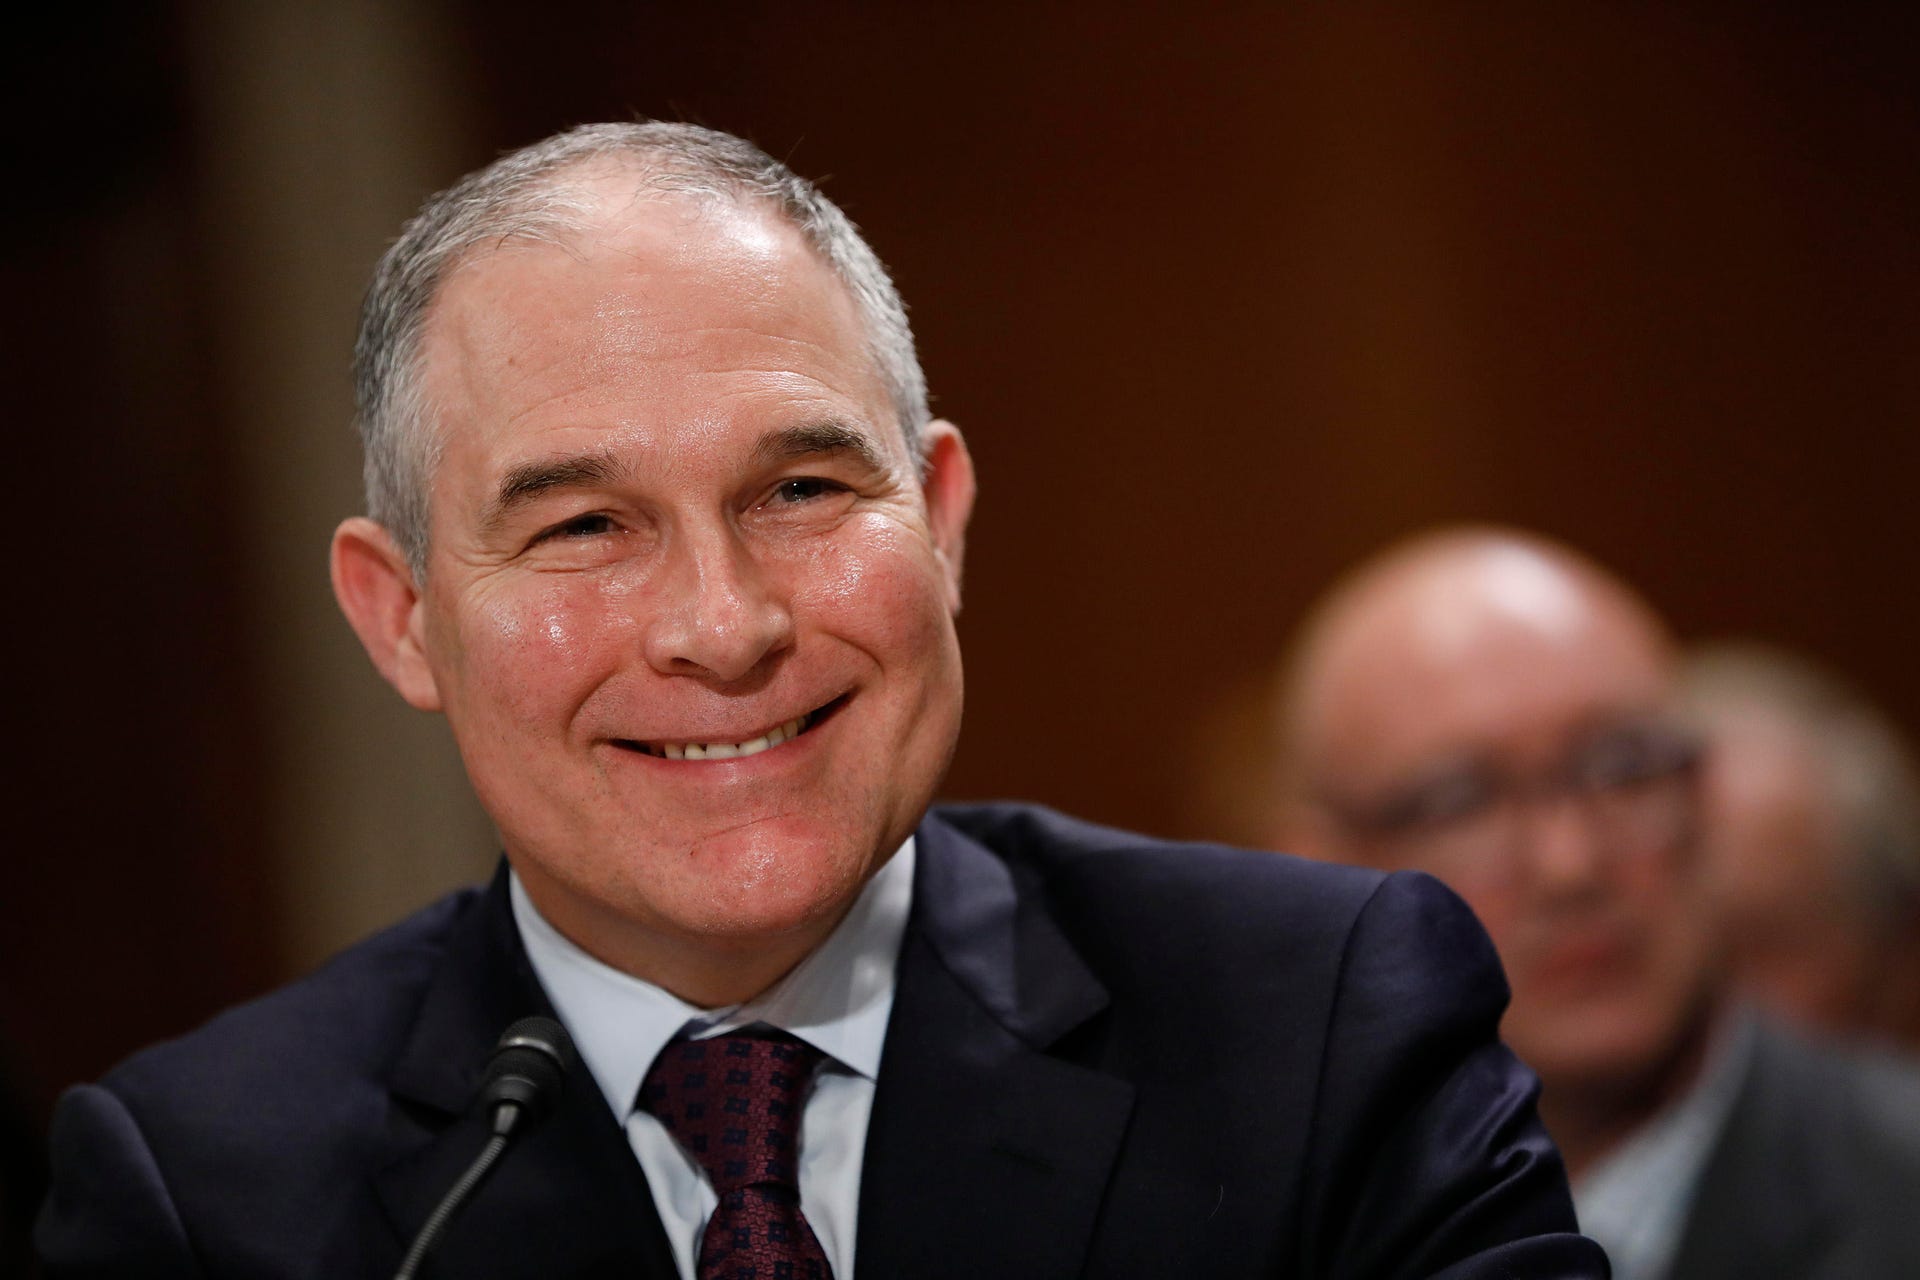 Senate Holds Confirmation Hearing For Scott Pruitt To Become EPA Administrator